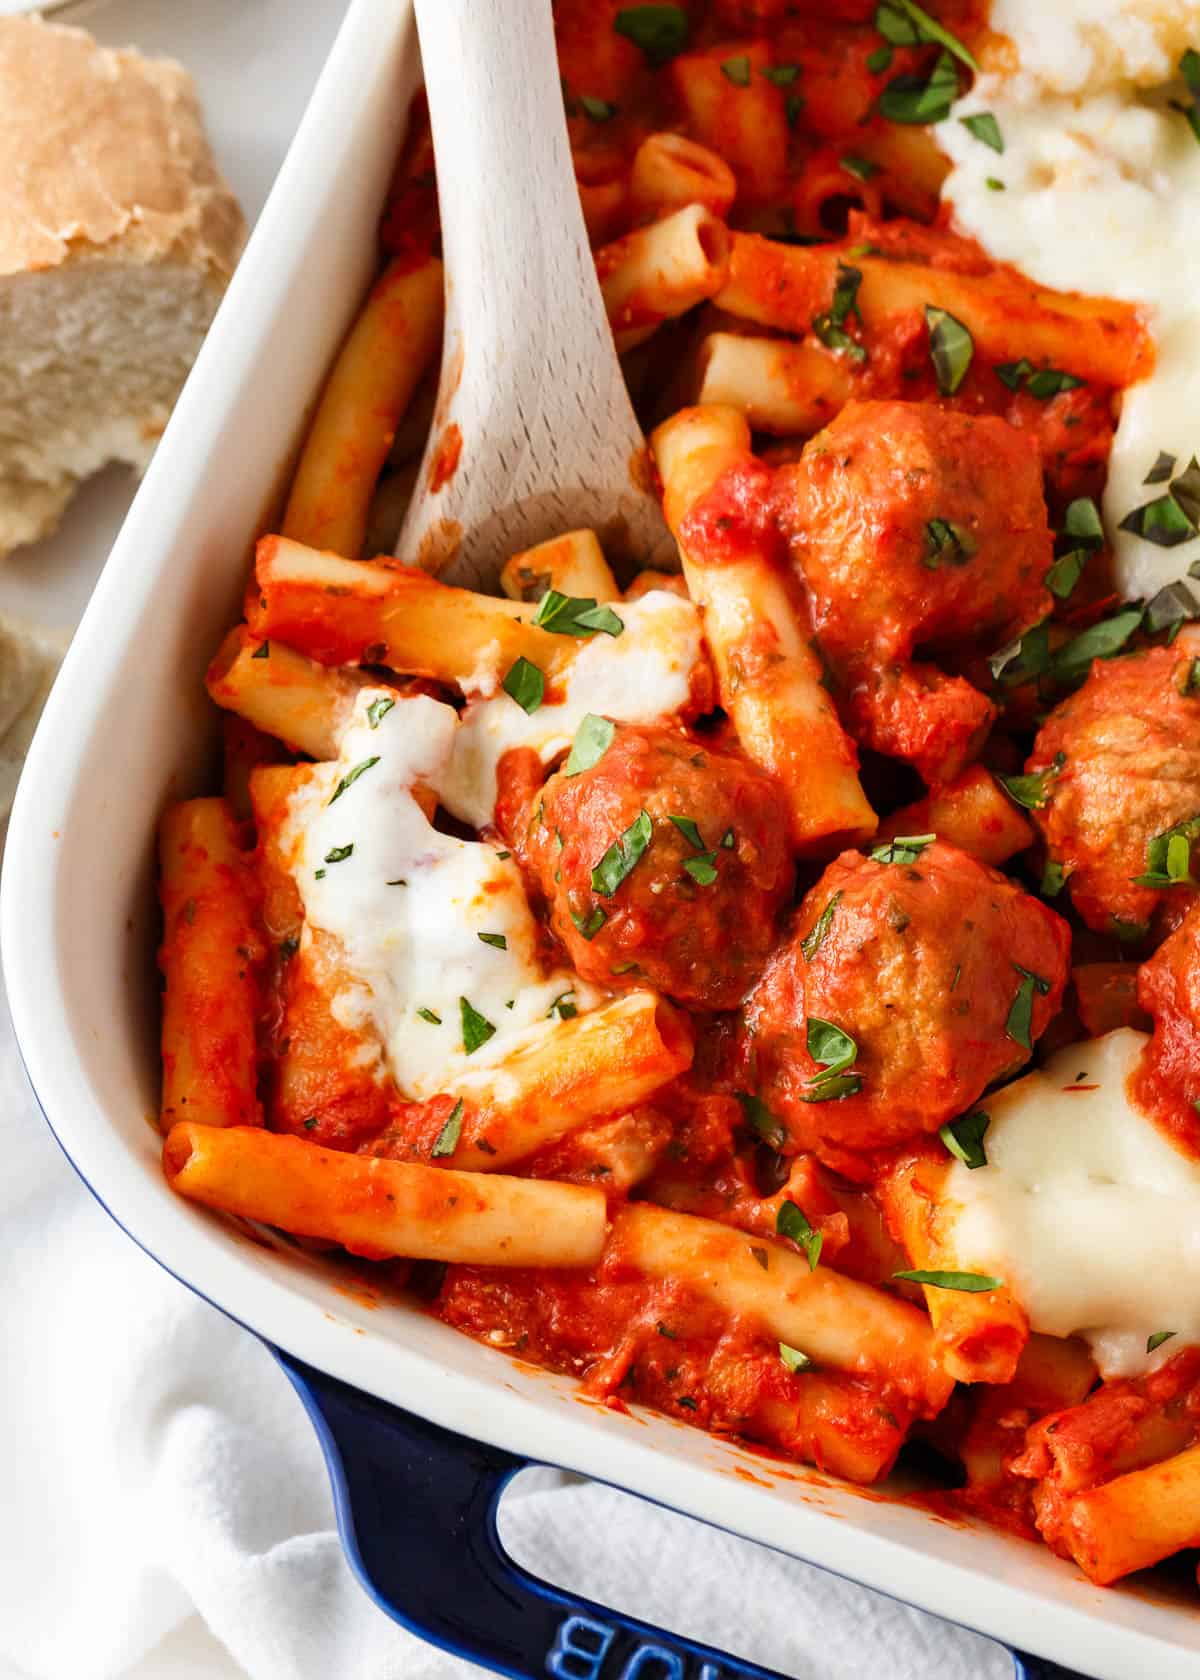 Spoonful on baked ziti with meatballs.